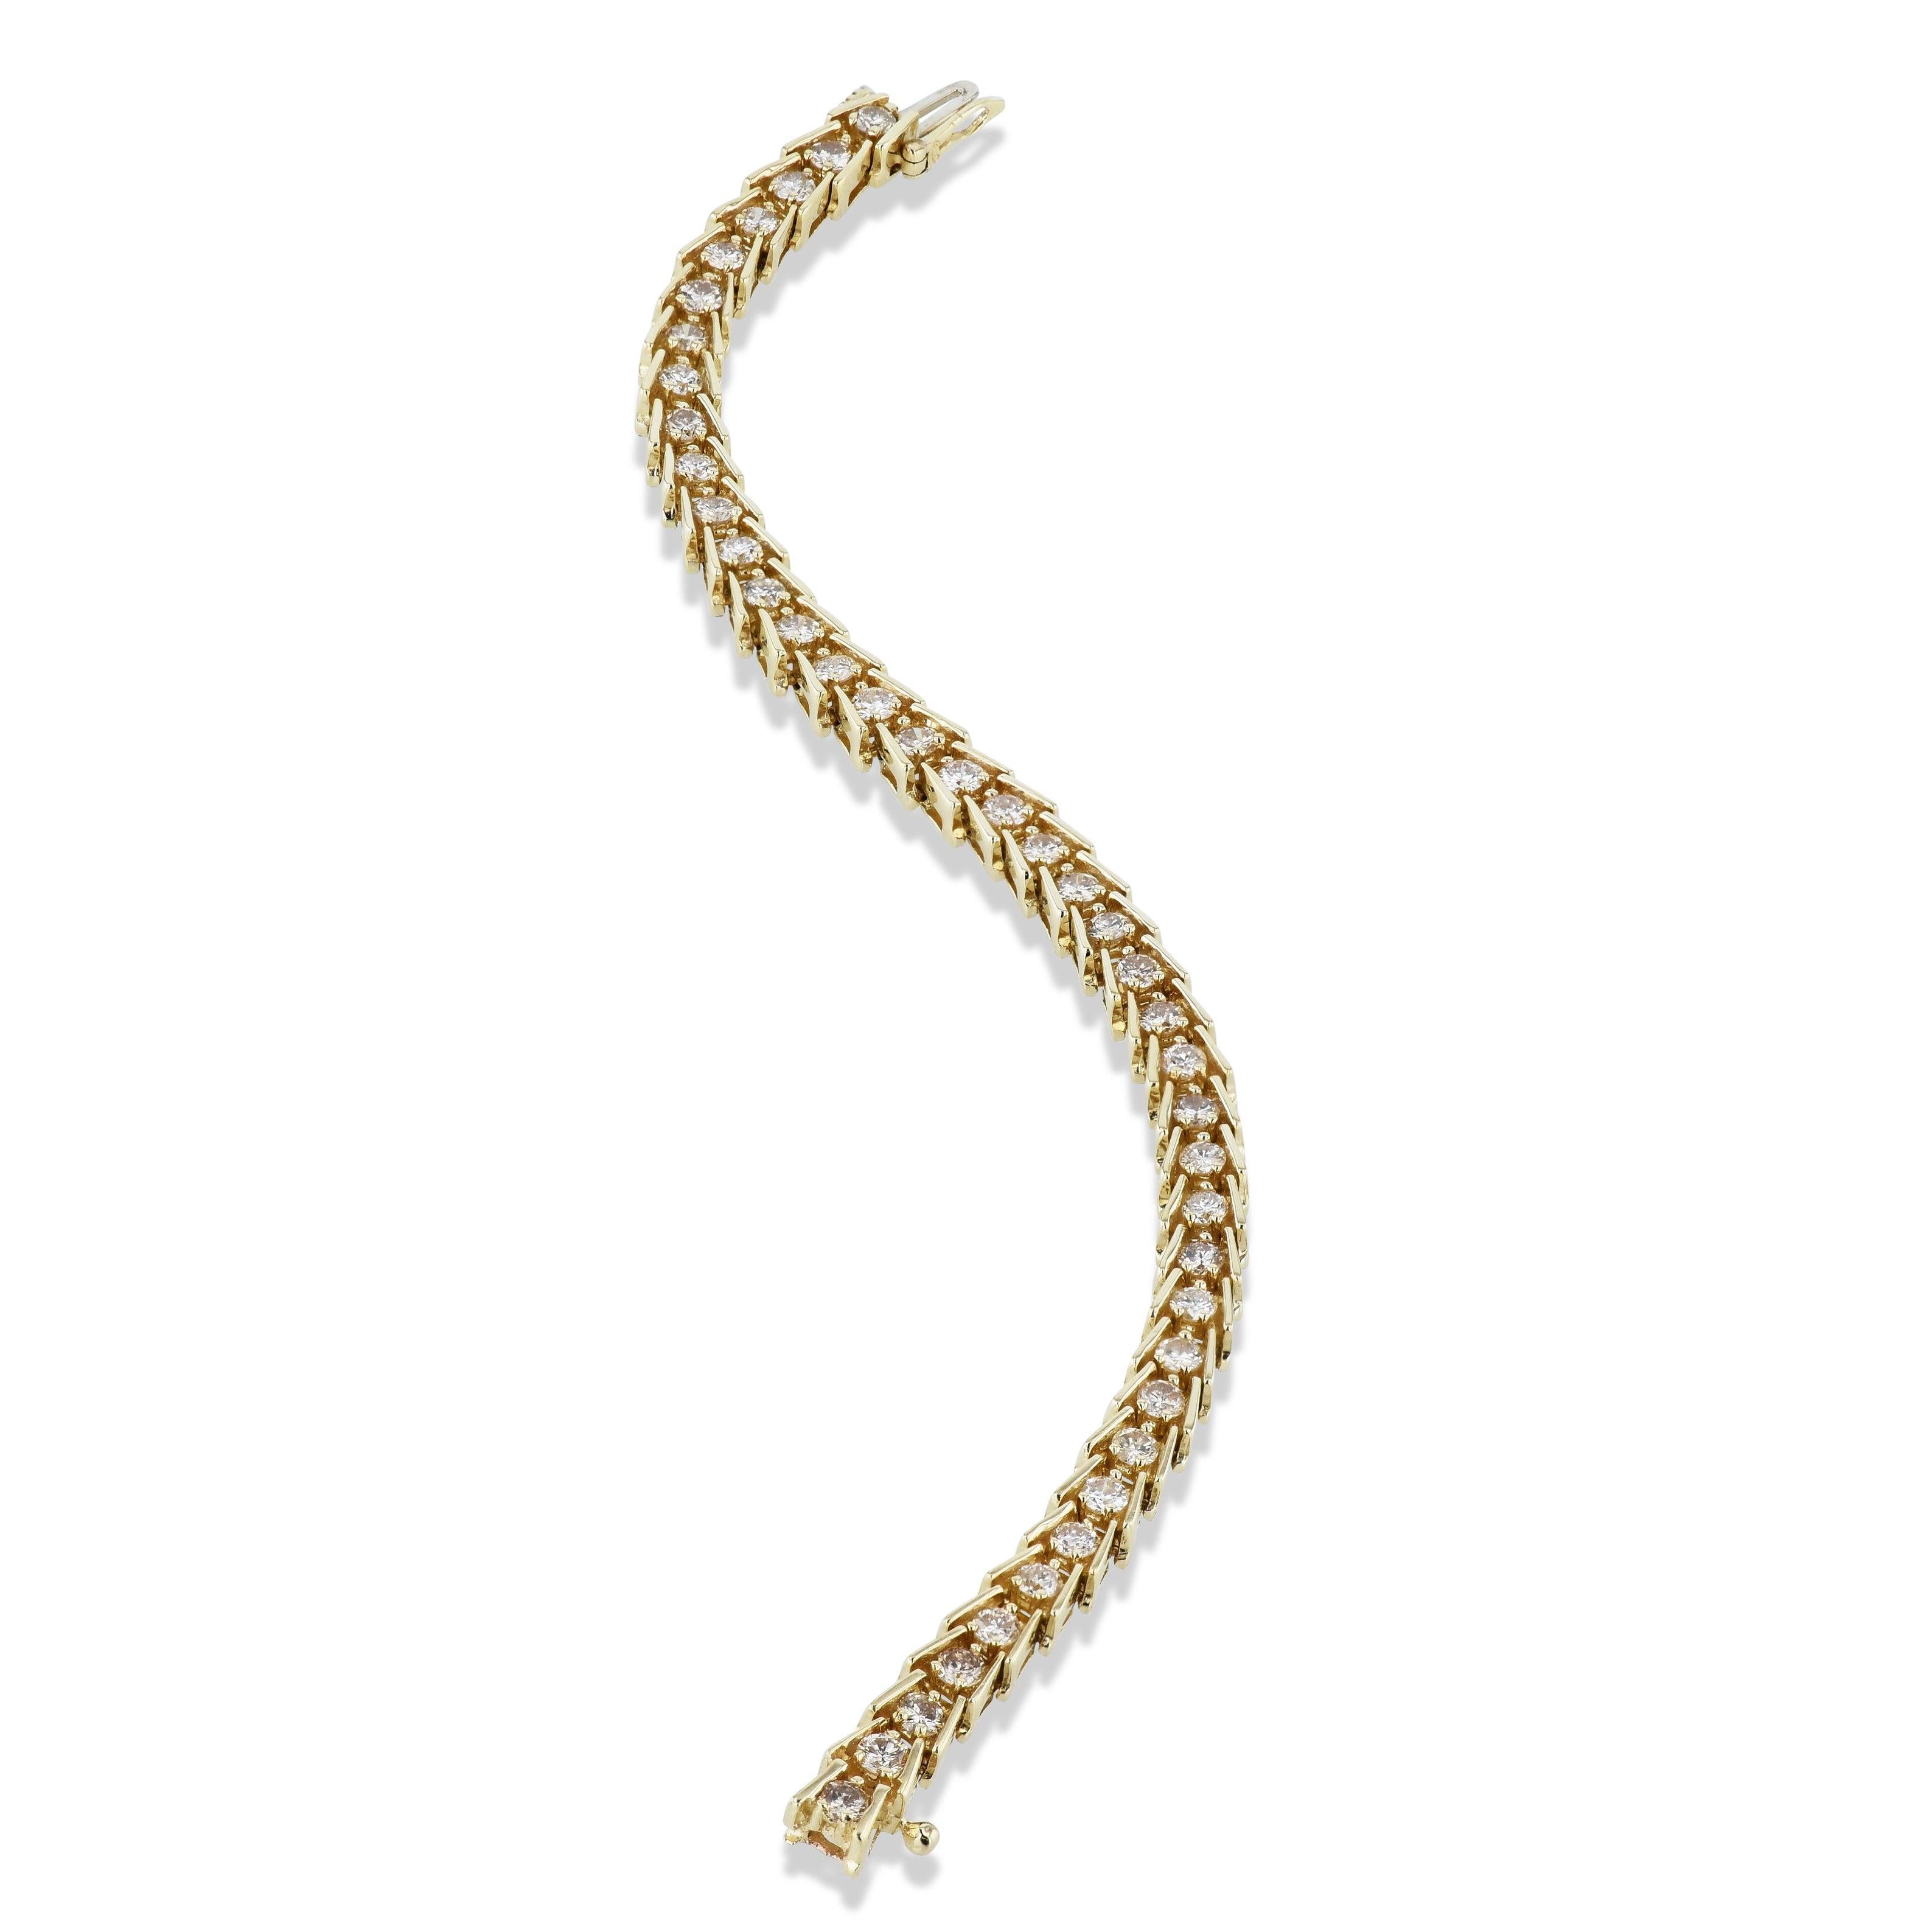 Discover the extraordinary beauty of this 14kt Yellow Gold Diamond Estate Tennis Bracelet! Boasting an awe-inspiring diamonds, it's 3.8mm wide and 6.75 inches long a true statement piece!
Yellow Gold Diamond Estate Tennis Bracelet
14kt. Yellow